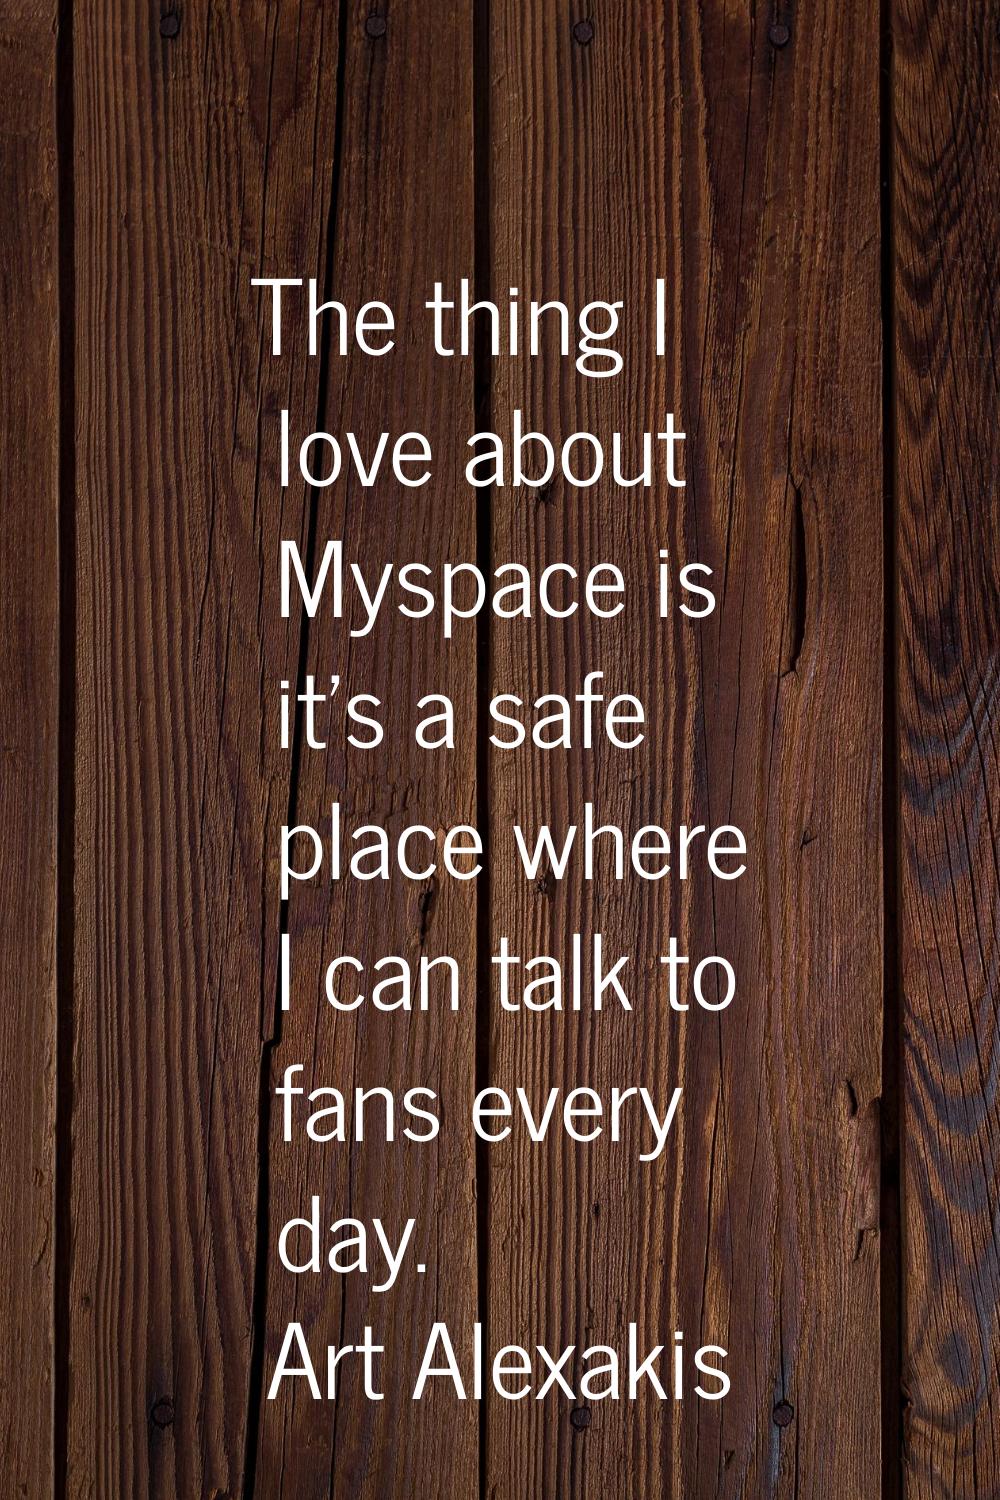 The thing I love about Myspace is it's a safe place where I can talk to fans every day.